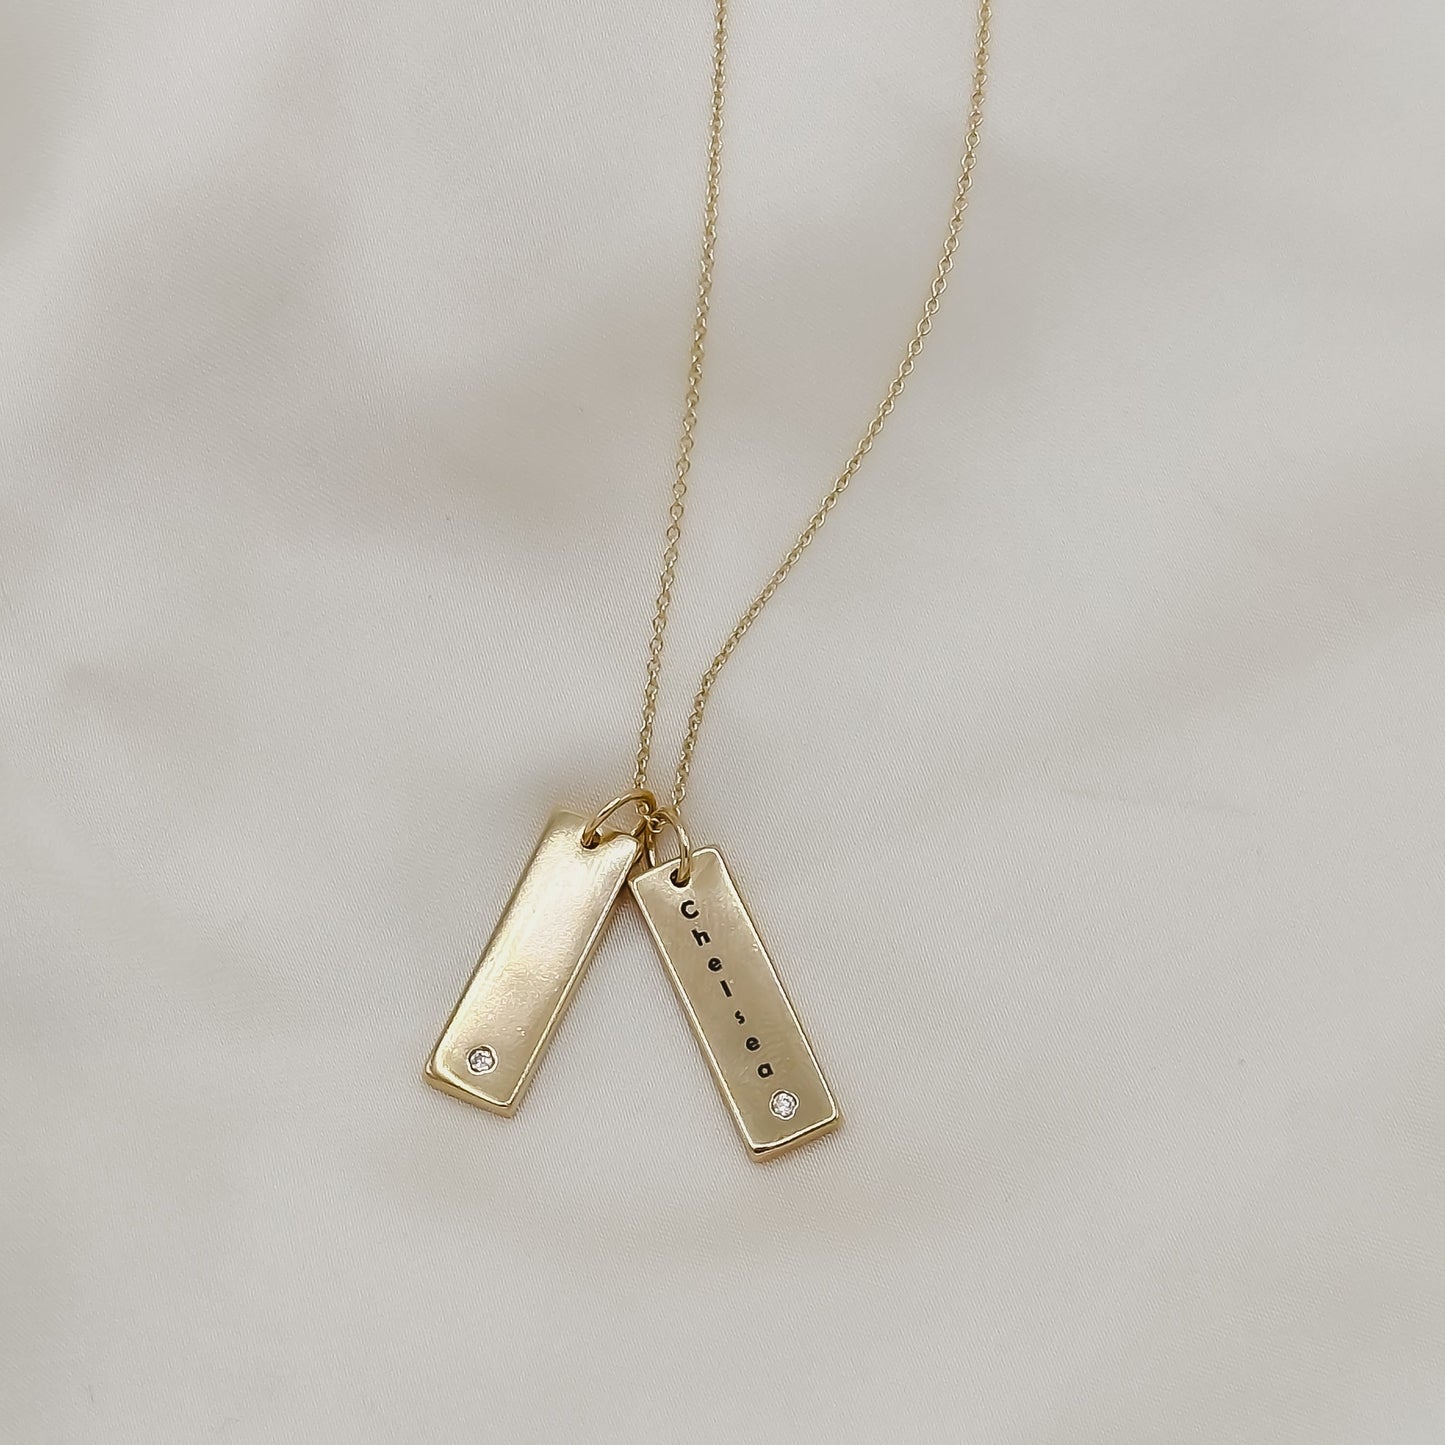 Custom Engraved Tag Necklace